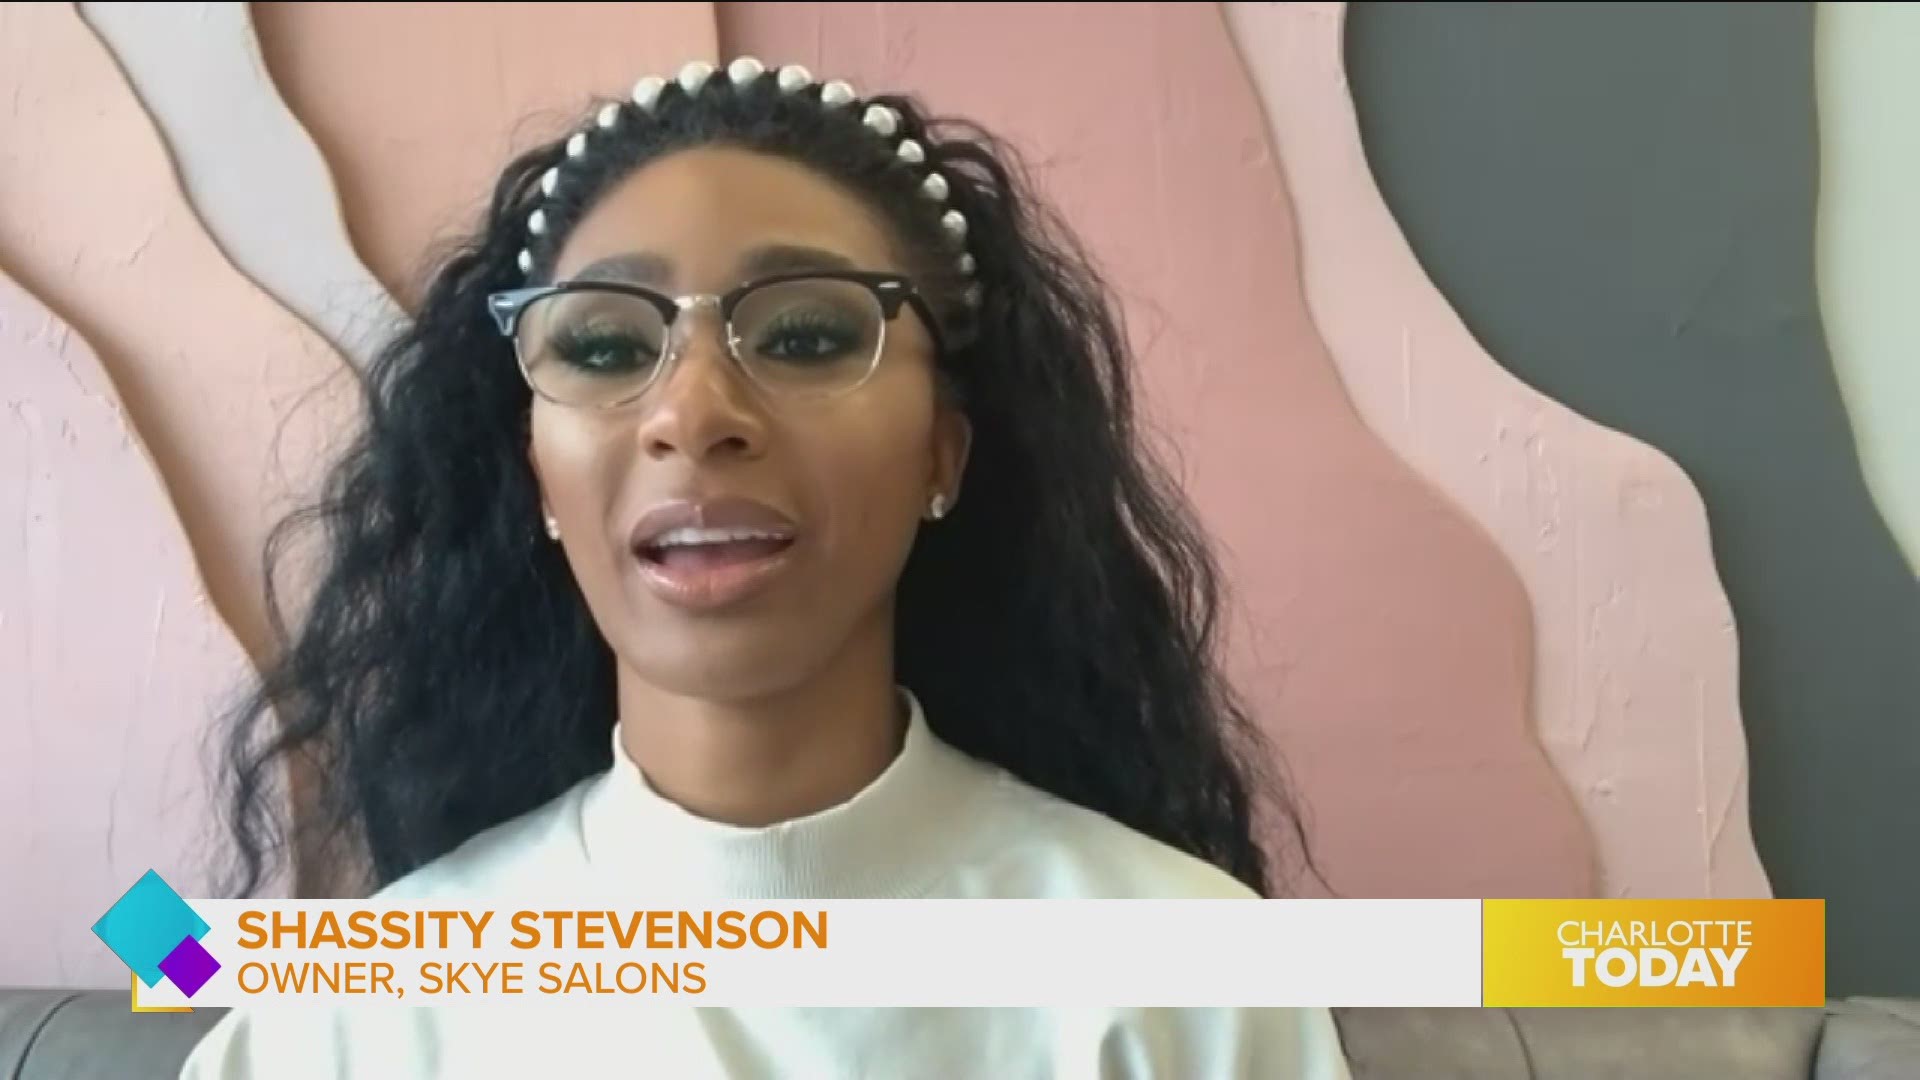 Skye Salons is first of its kind in Charlotte